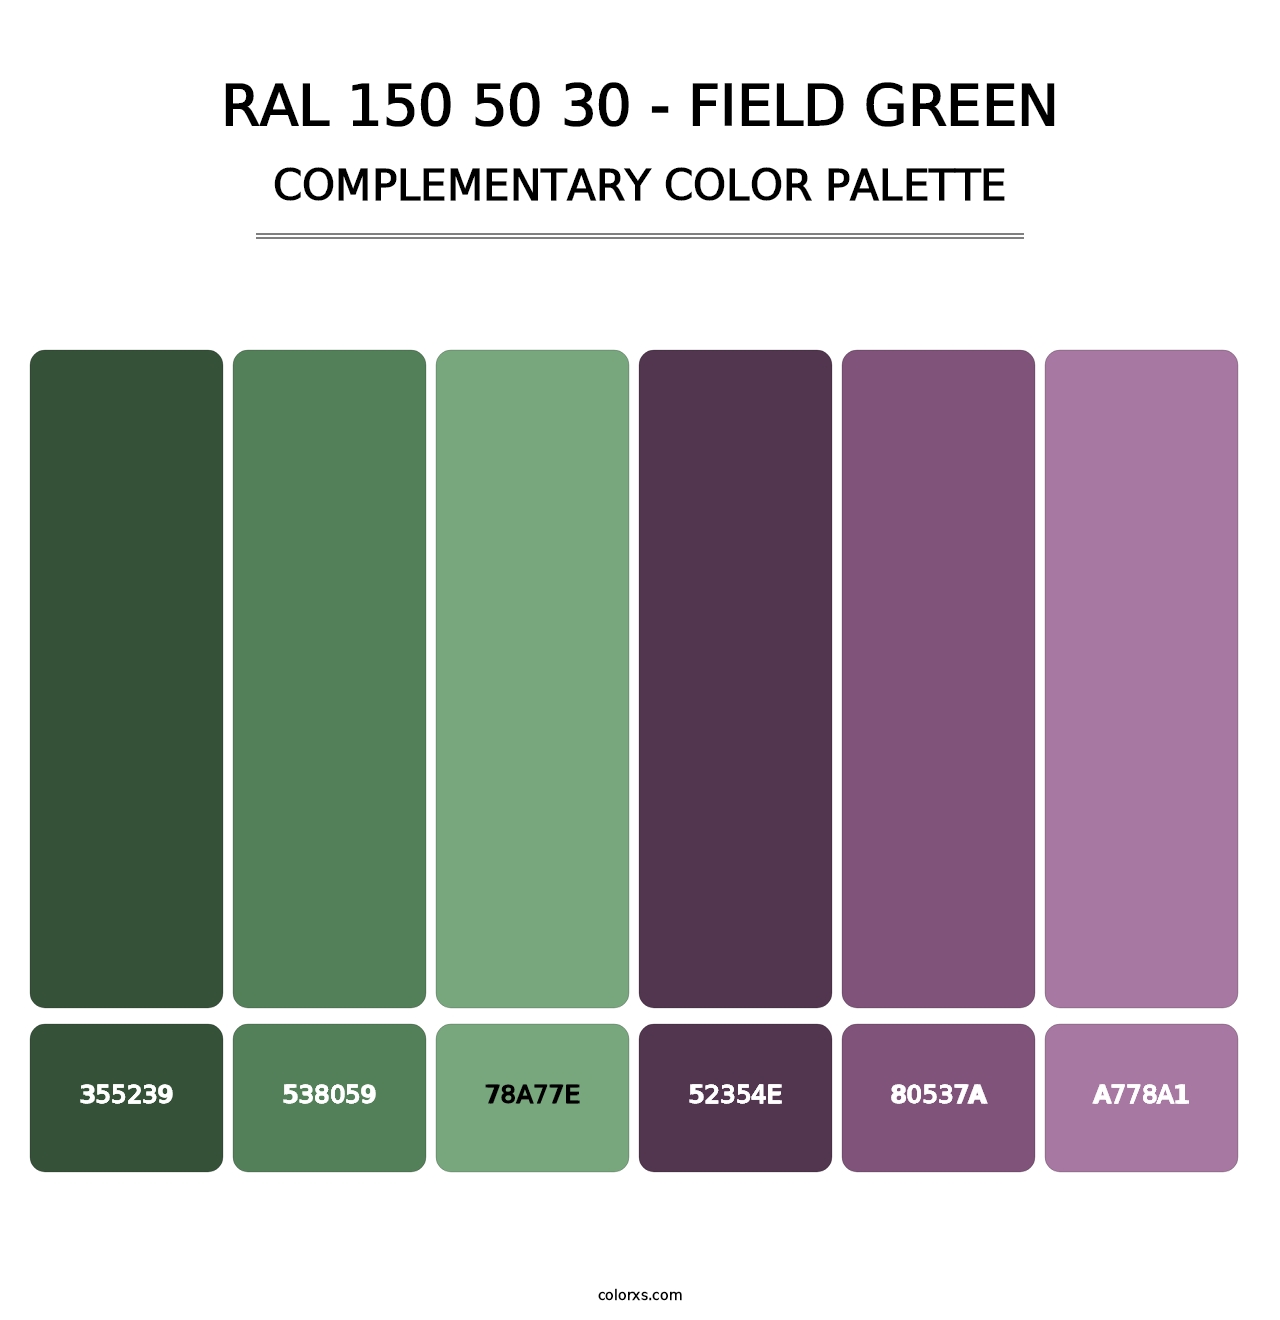 RAL 150 50 30 - Field Green - Complementary Color Palette